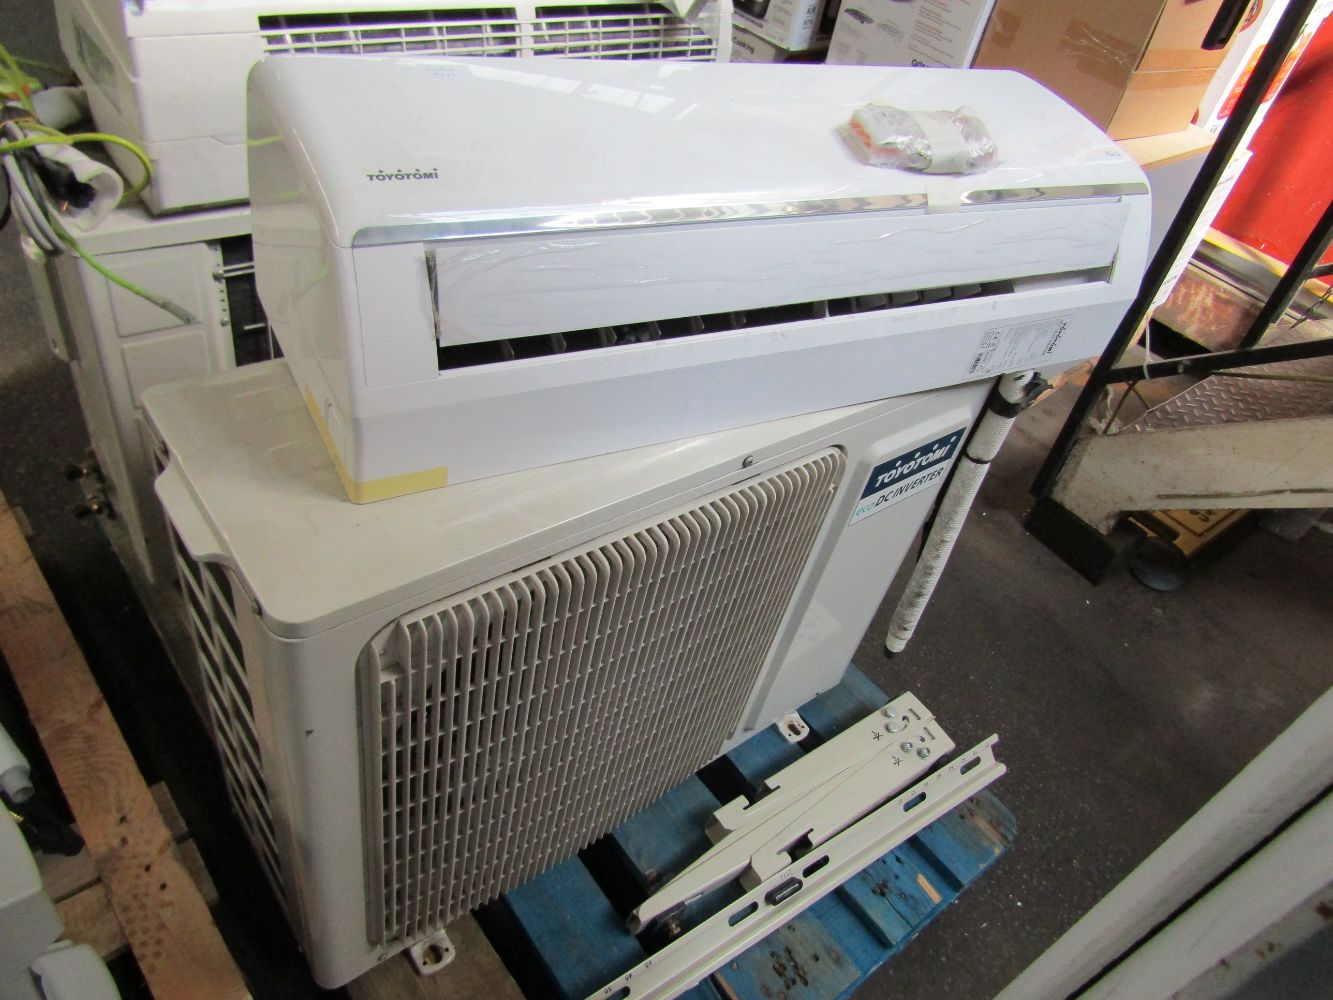 Tech, Air Con Units & Electricals such as Samsung 8K TV, Mission Audio, Electric meat slicers and more